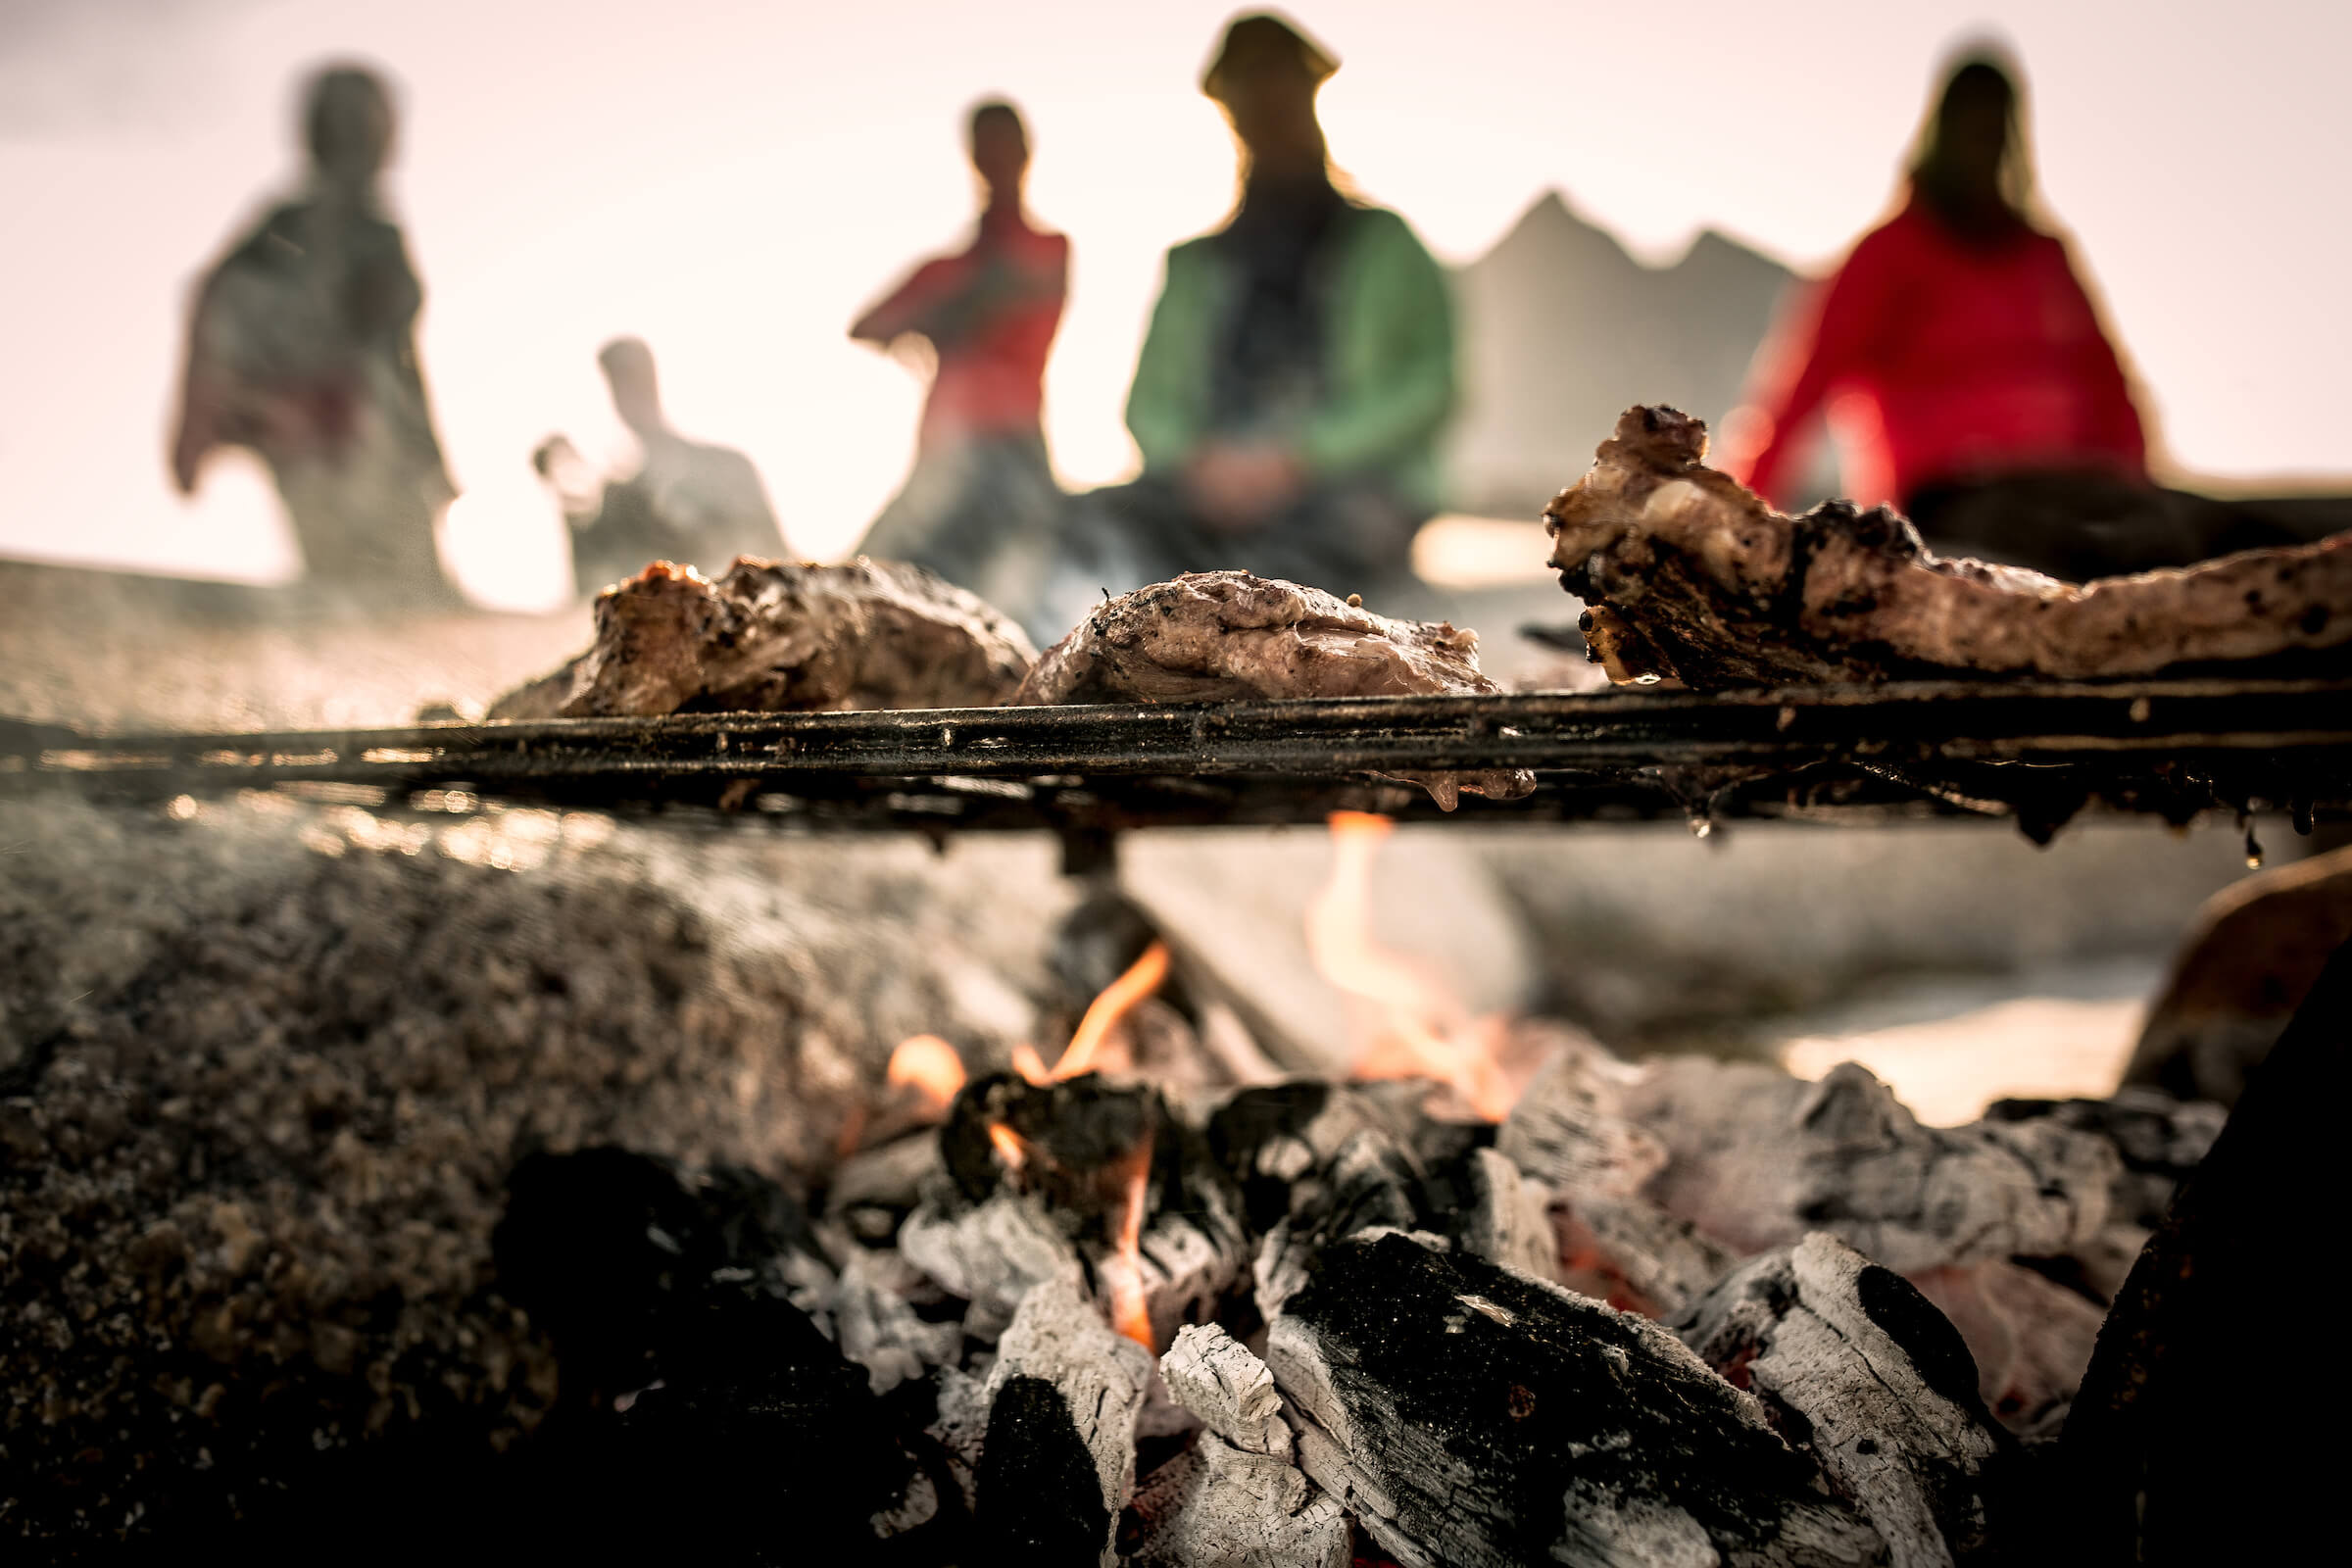 Food roasting over a fire in East Greenland. Photo by Mads Pihl